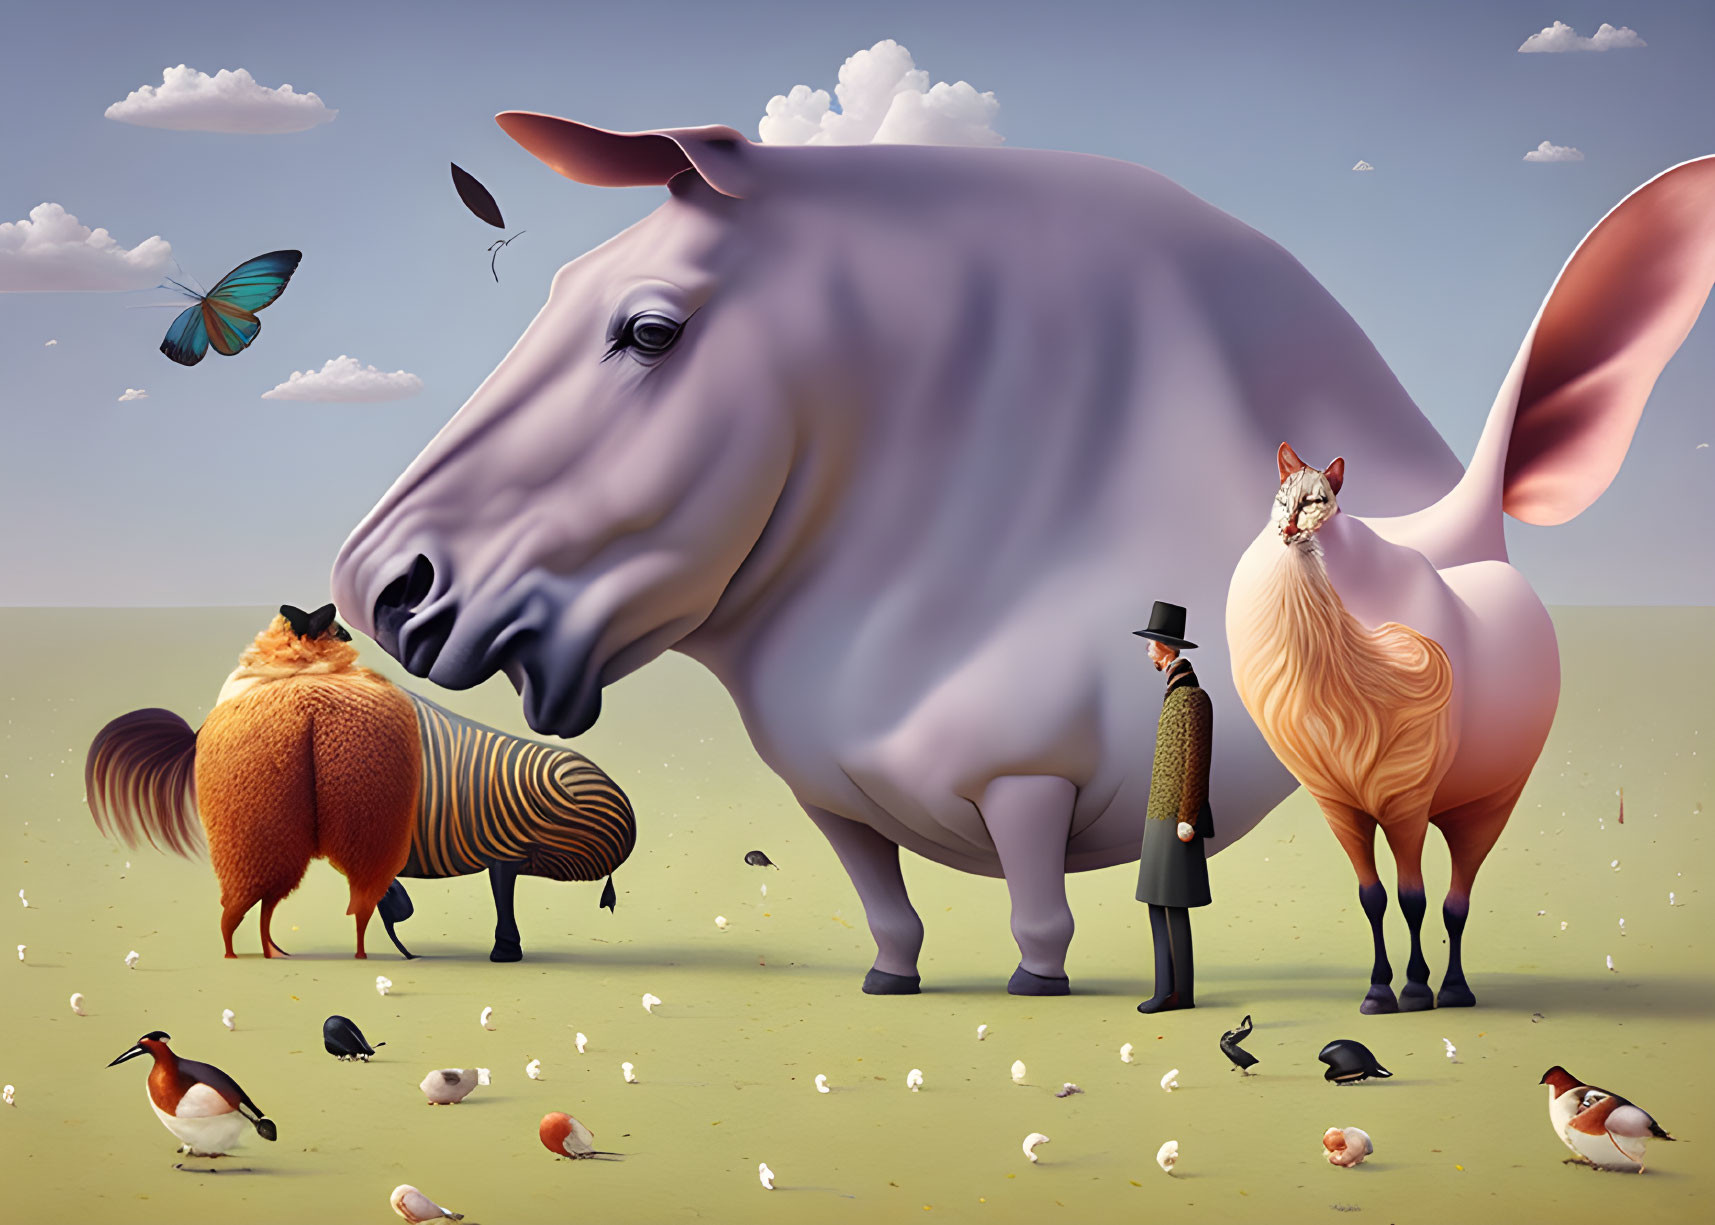 Surreal digital artwork: Oversized animals, small man with hat, serene sky.